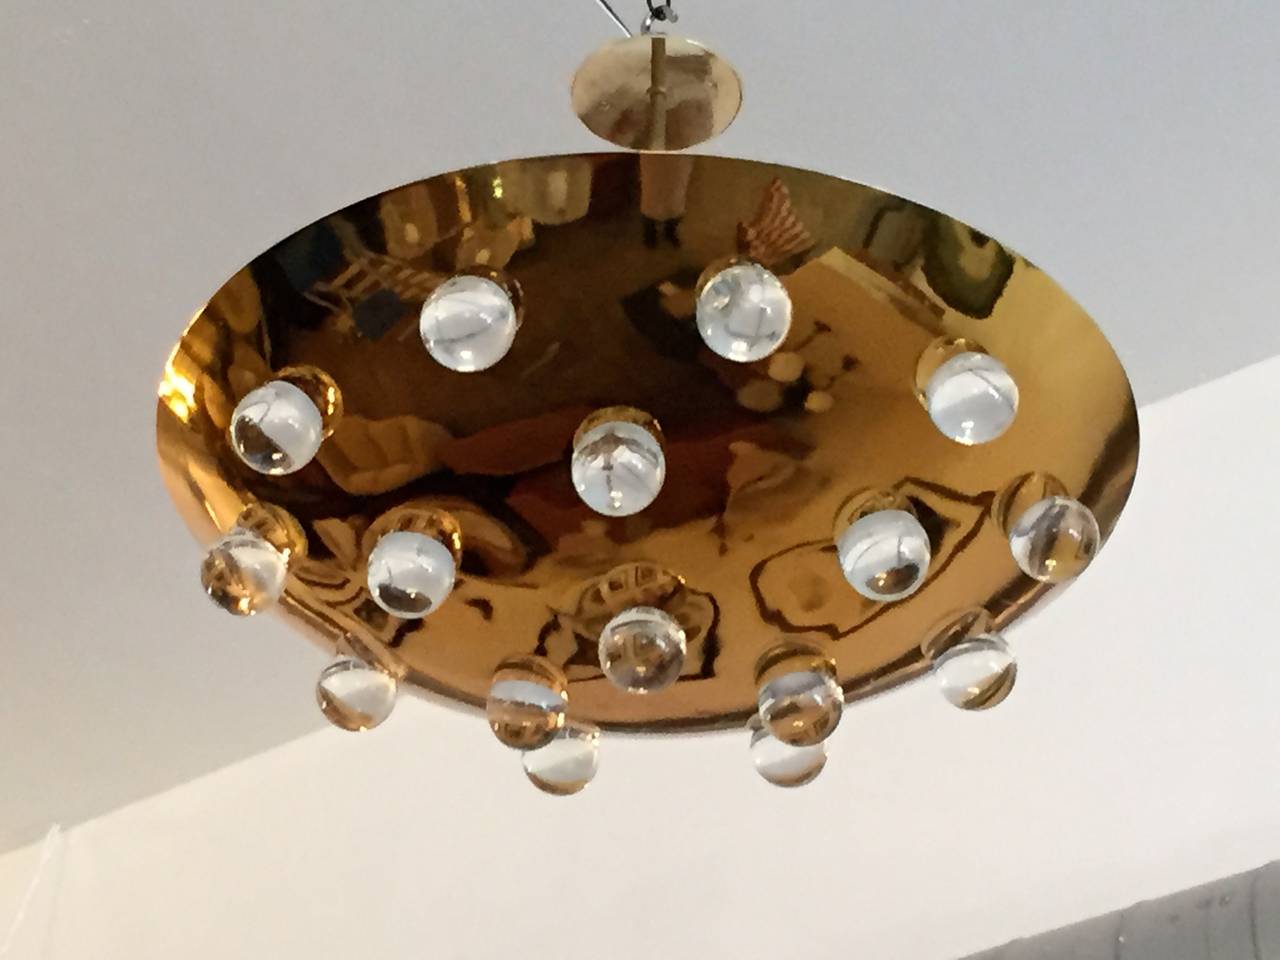 A wonderful pair of 1960s French gold-plated brass round disc fixture with 16 solid glass orbs. Five-light sources which emit light downward through the glass as well as up toward the ceiling. The ceiling pole can be lengthened or shortened. Rewired